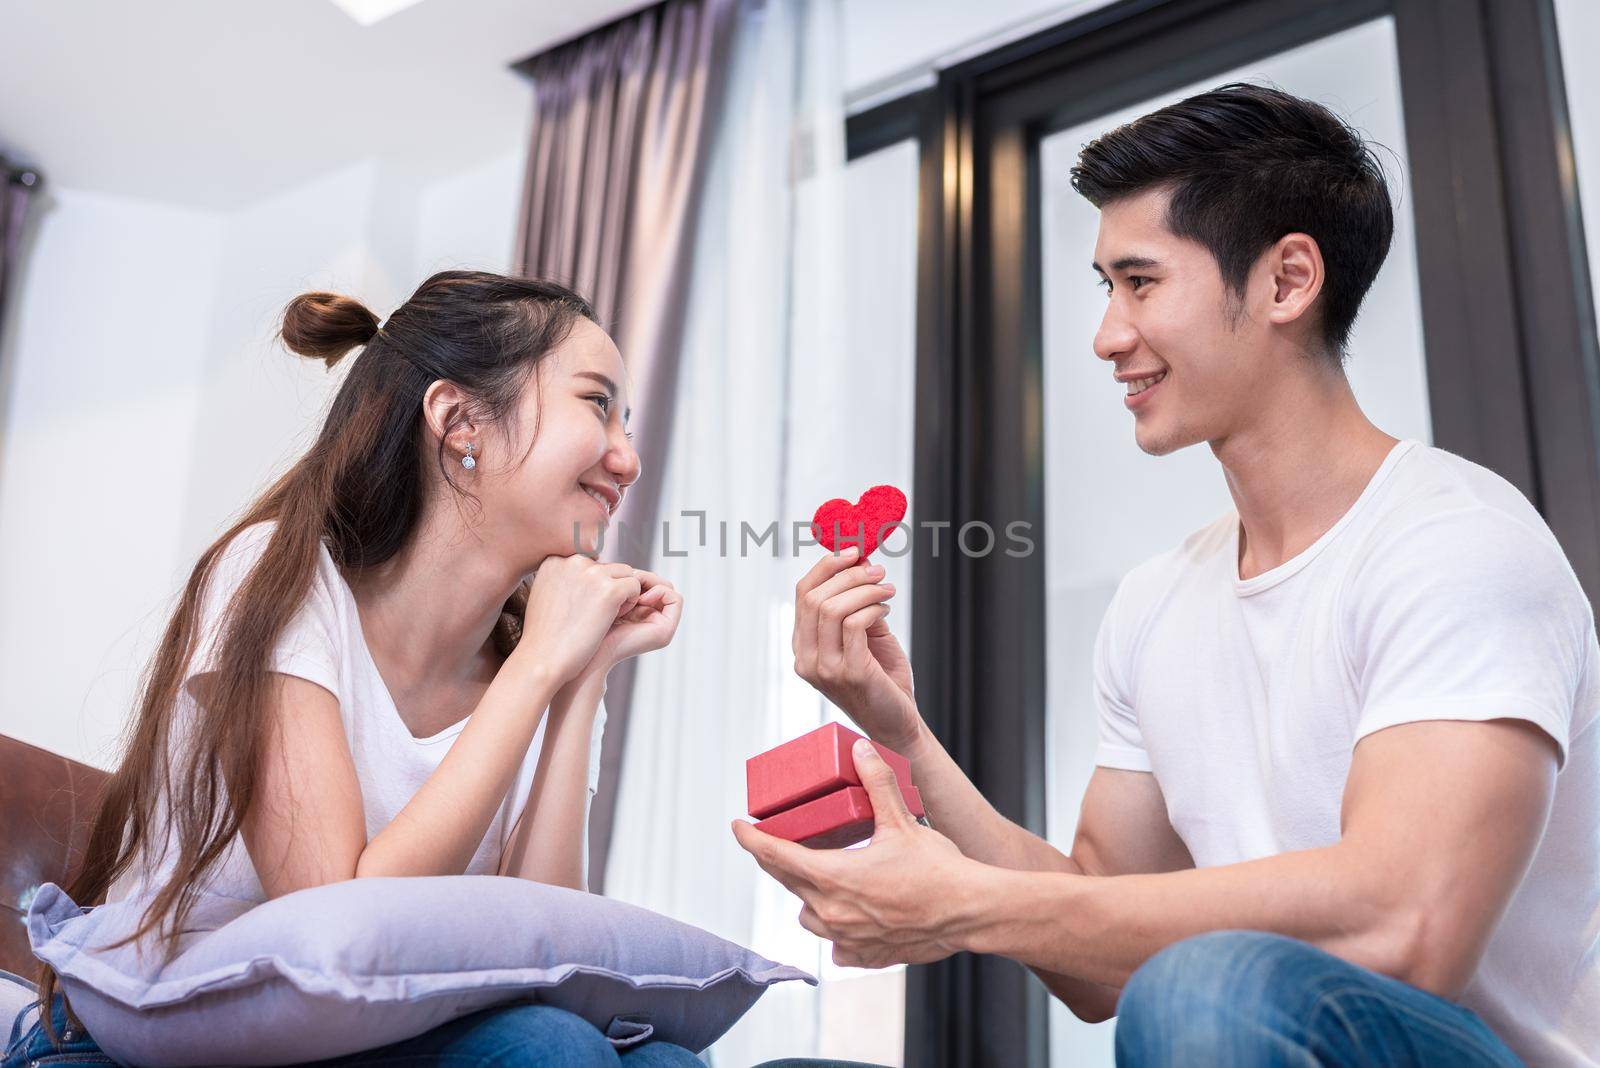 Man holding surprise box and red heart gift to woman on sofa at home in living room Relax and Holiday concept. Happy sweet romantic of young couple in home theme